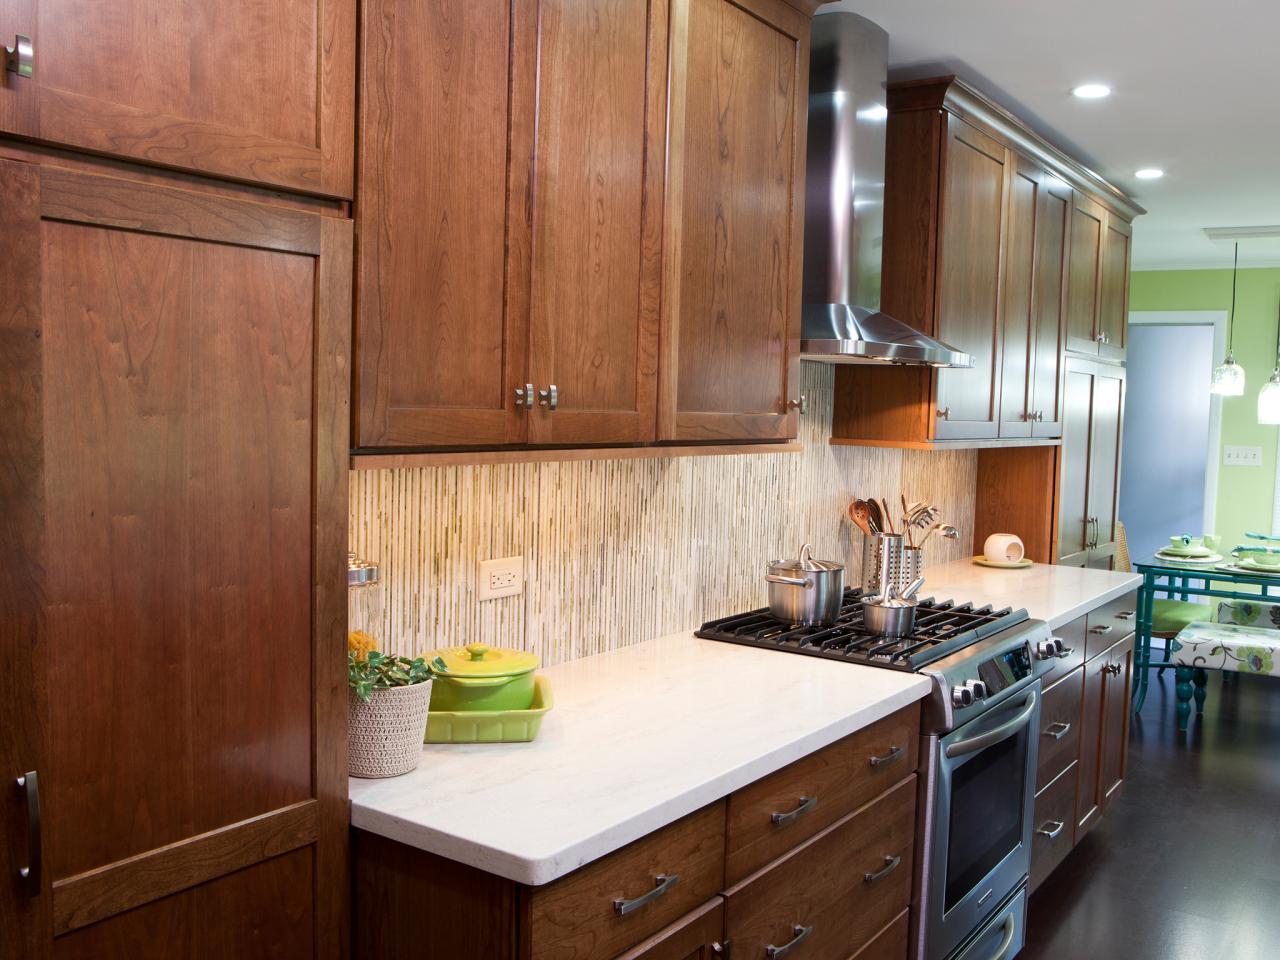 ready-to-assemble kitchen cabinets: pictures, options, tips